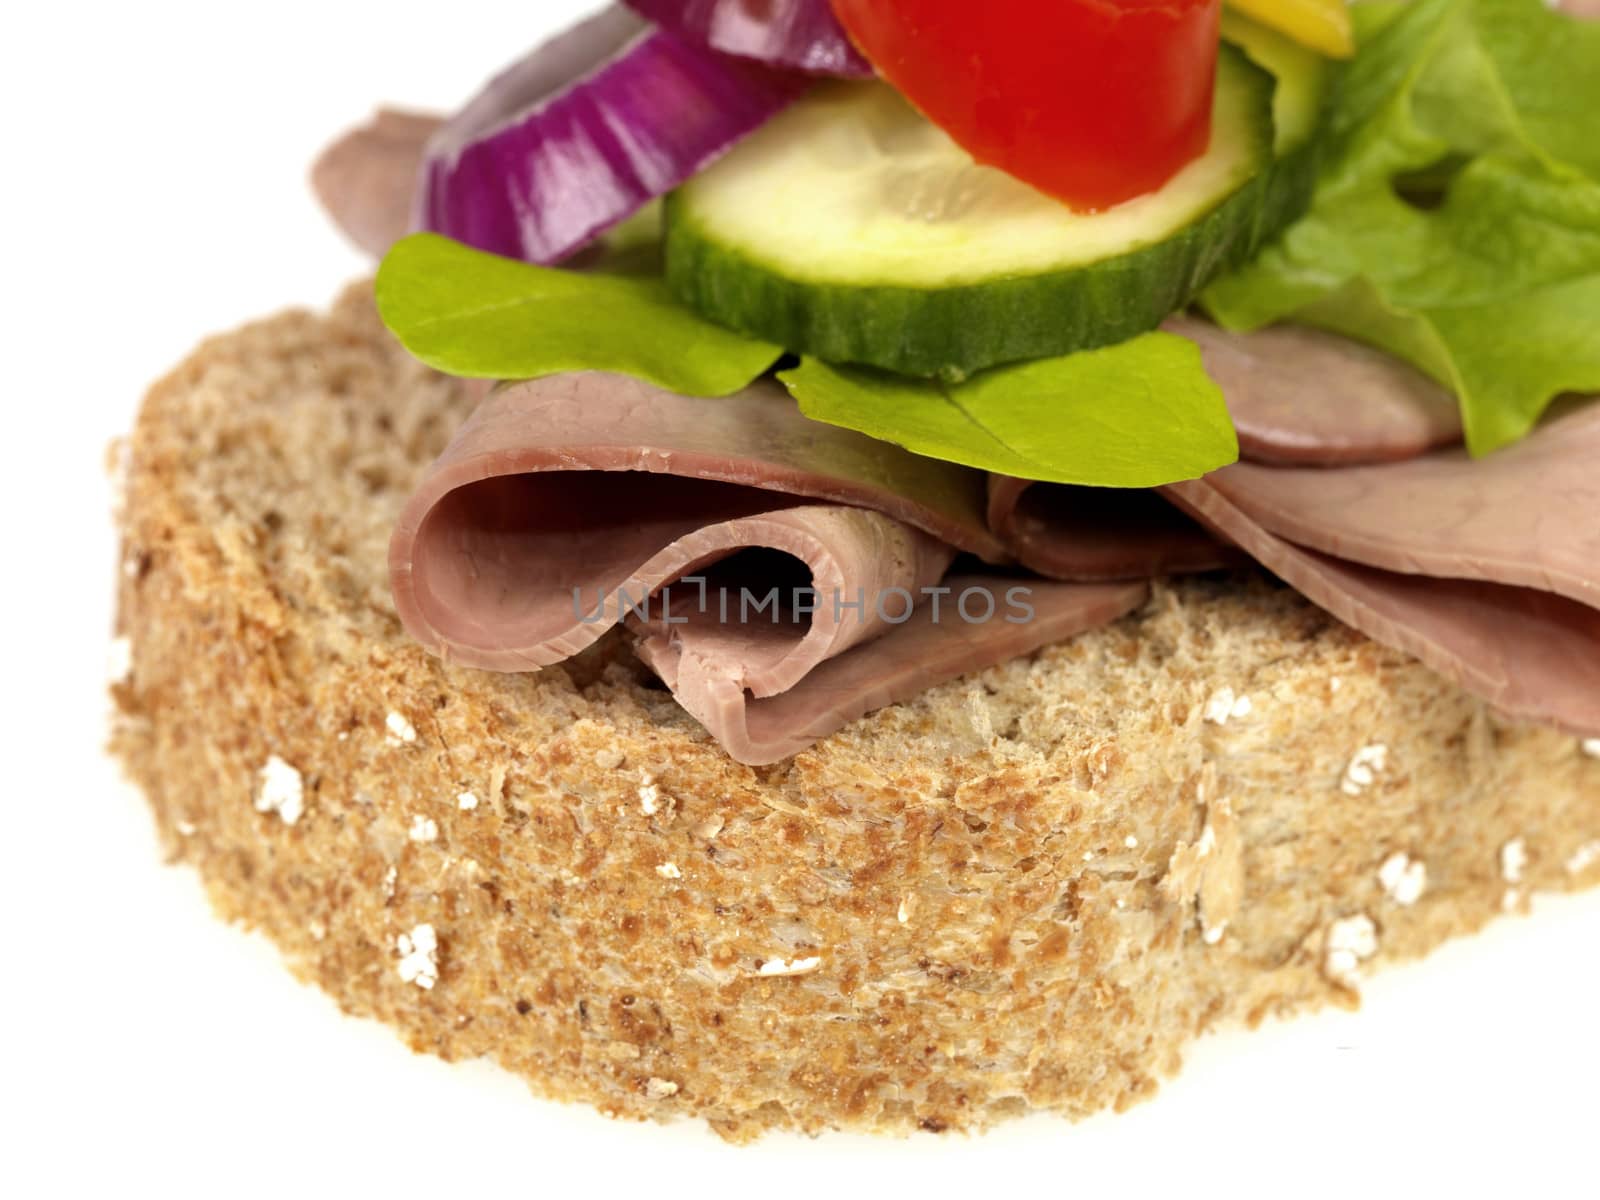 Roast Beef and Salad Sandwich by Whiteboxmedia